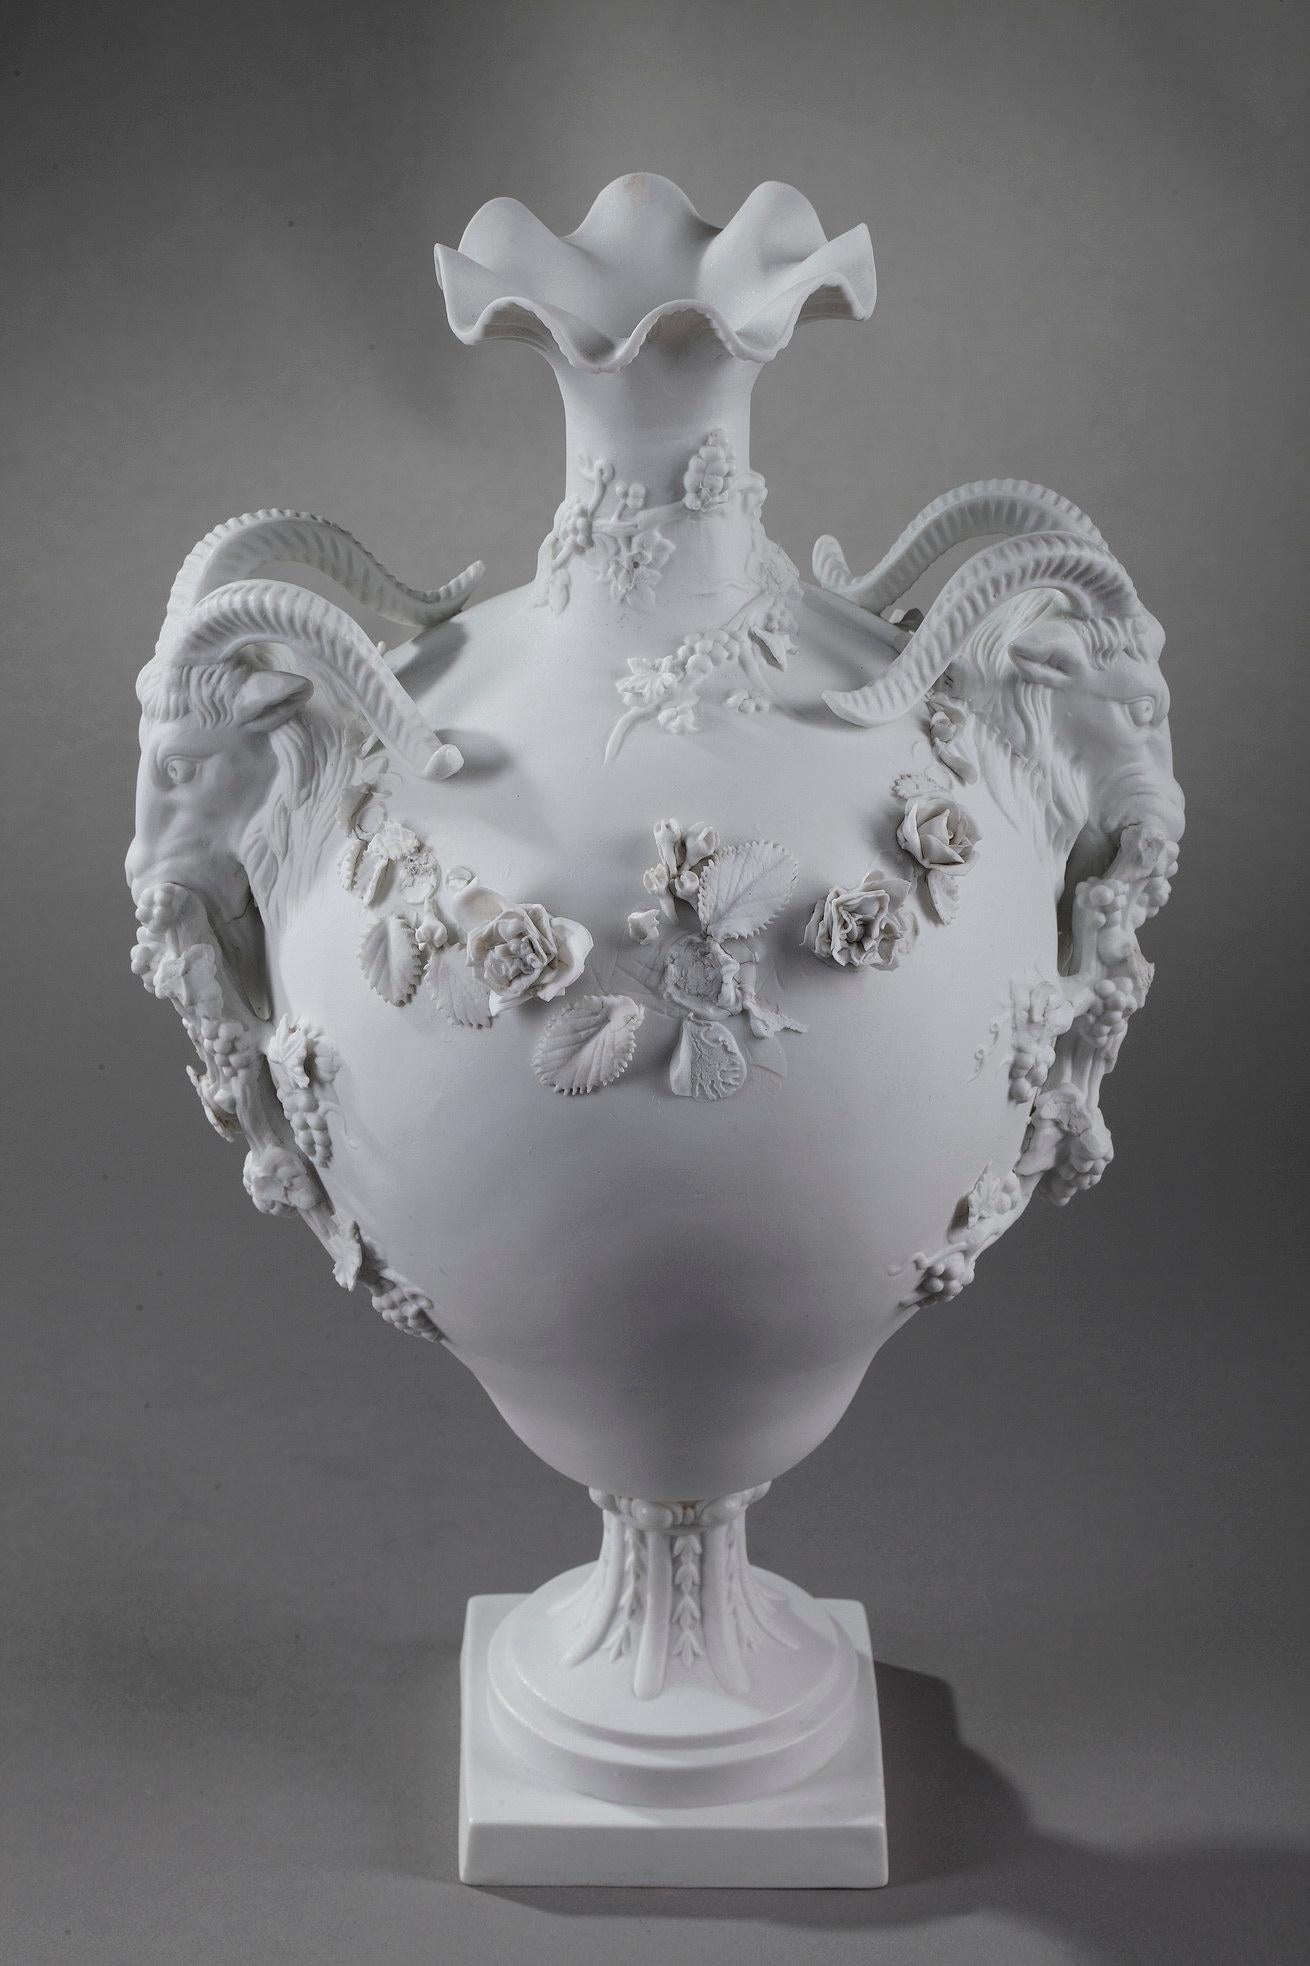 Porcelain bisque vase with poly-lobed neck, the handles decorated with goats holding bunches of grapes in their mouths, after a model close to Duplessis called Goat's Head. The vase is highlighted with garland of roses and grapes. Sevres apocryphal